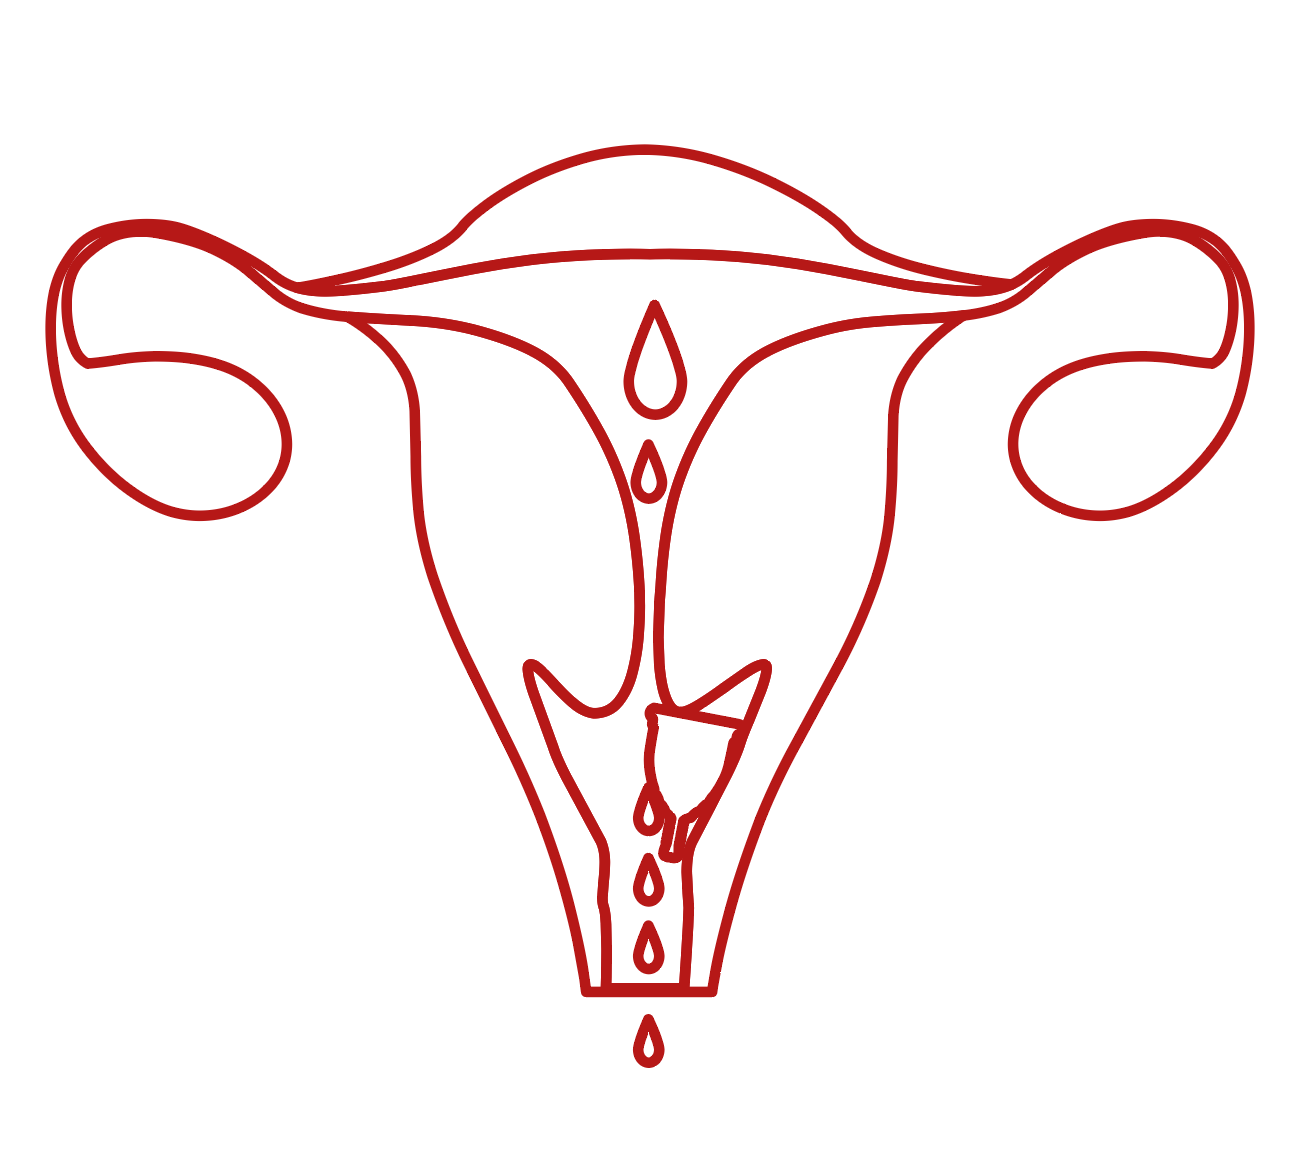 Menstrual cup wrong placement